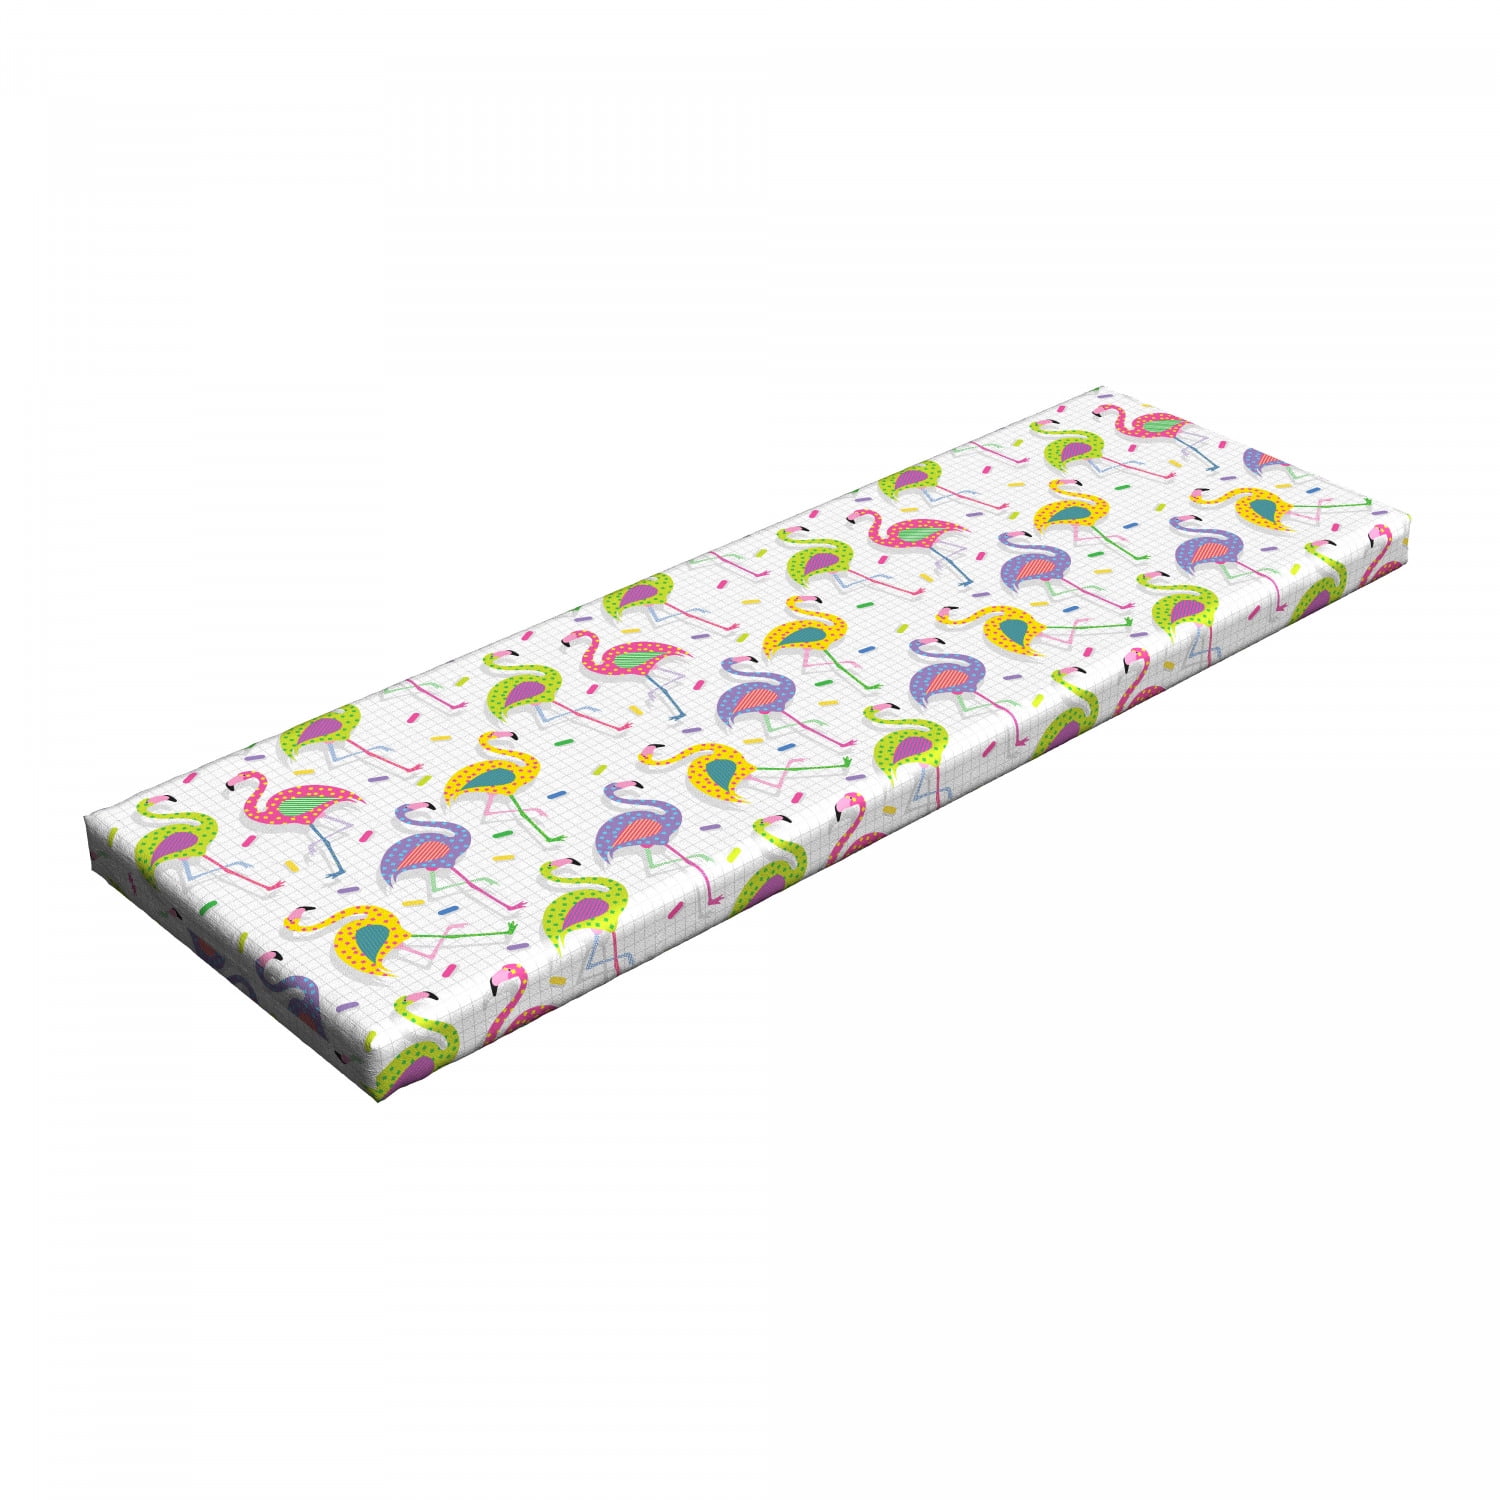 Er is een trend Clip vlinder Goed gevoel Flamingo Bench Pad, Colorful Retro Vintage Flamingo Patterns in Polka Dot  Design Checked Background, HR Foam Cushion with Decorative Fabric Cover,  45" x 15" x 2", Multicolor, by Ambesonne - Walmart.com